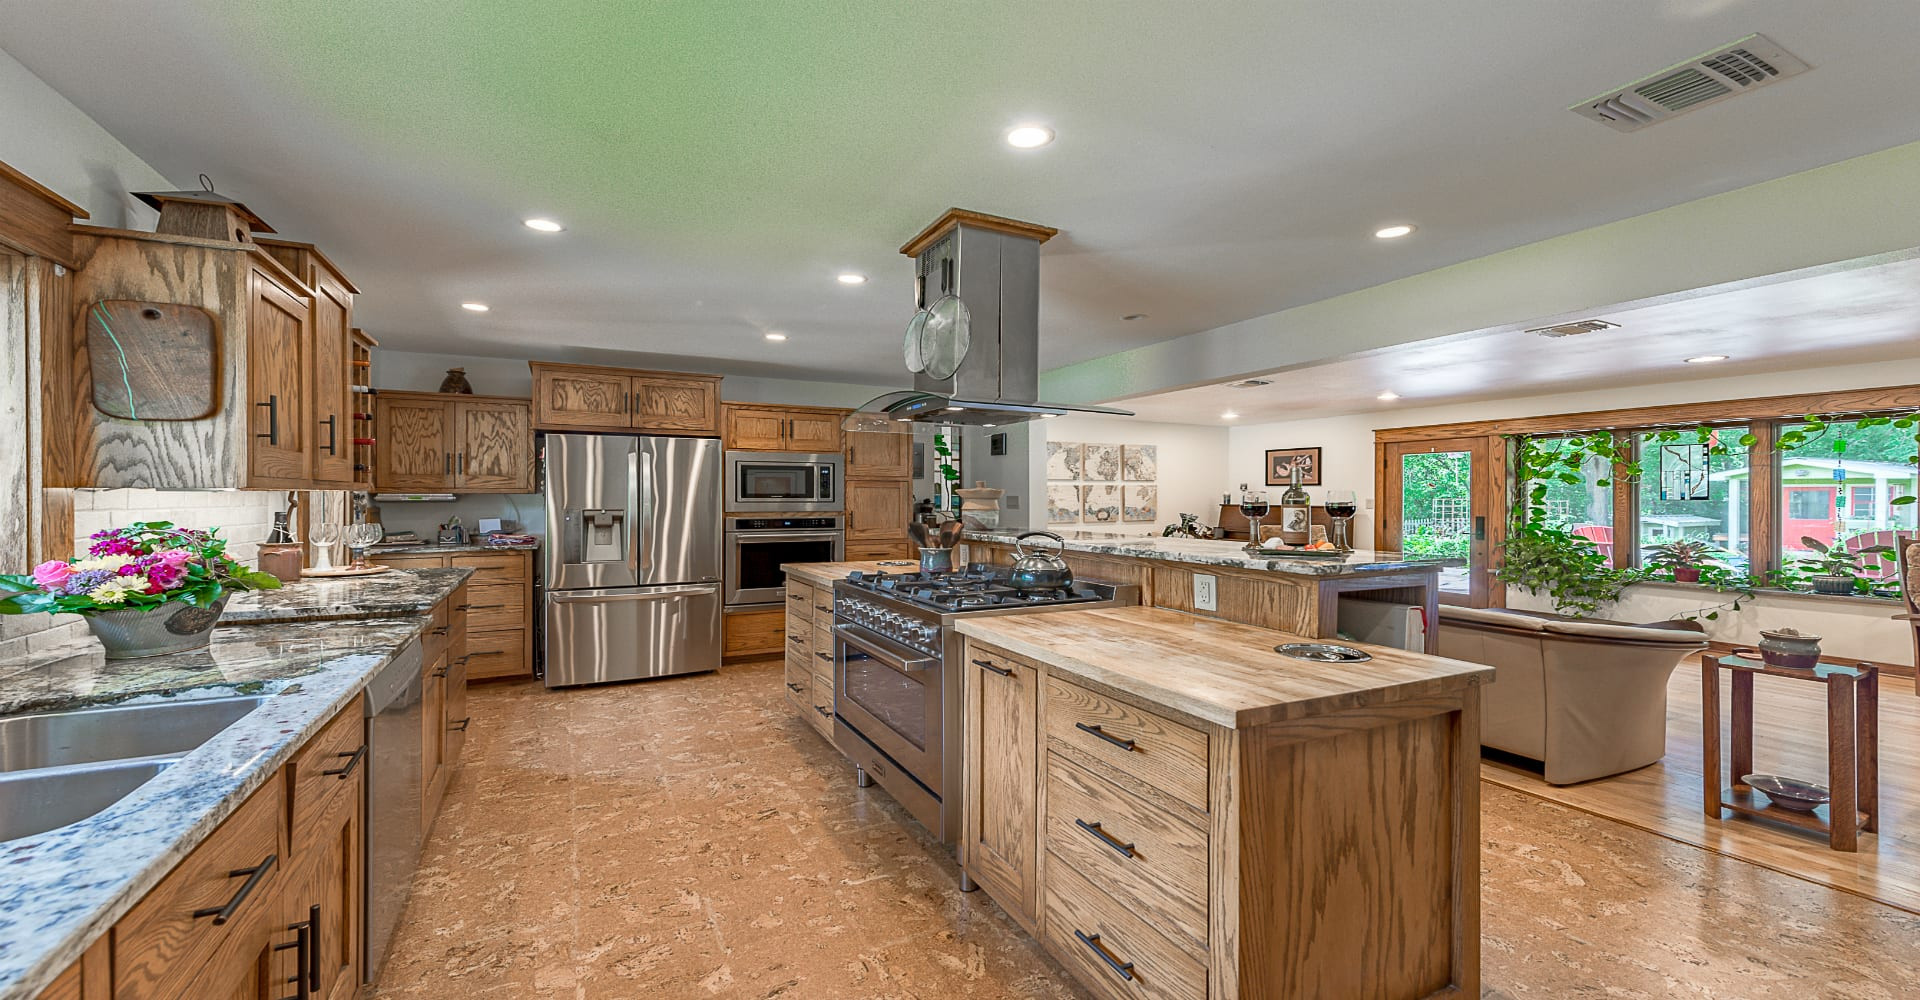 Remodeling Your Kitchen
 Remodeling your Home and Kitchen the right way